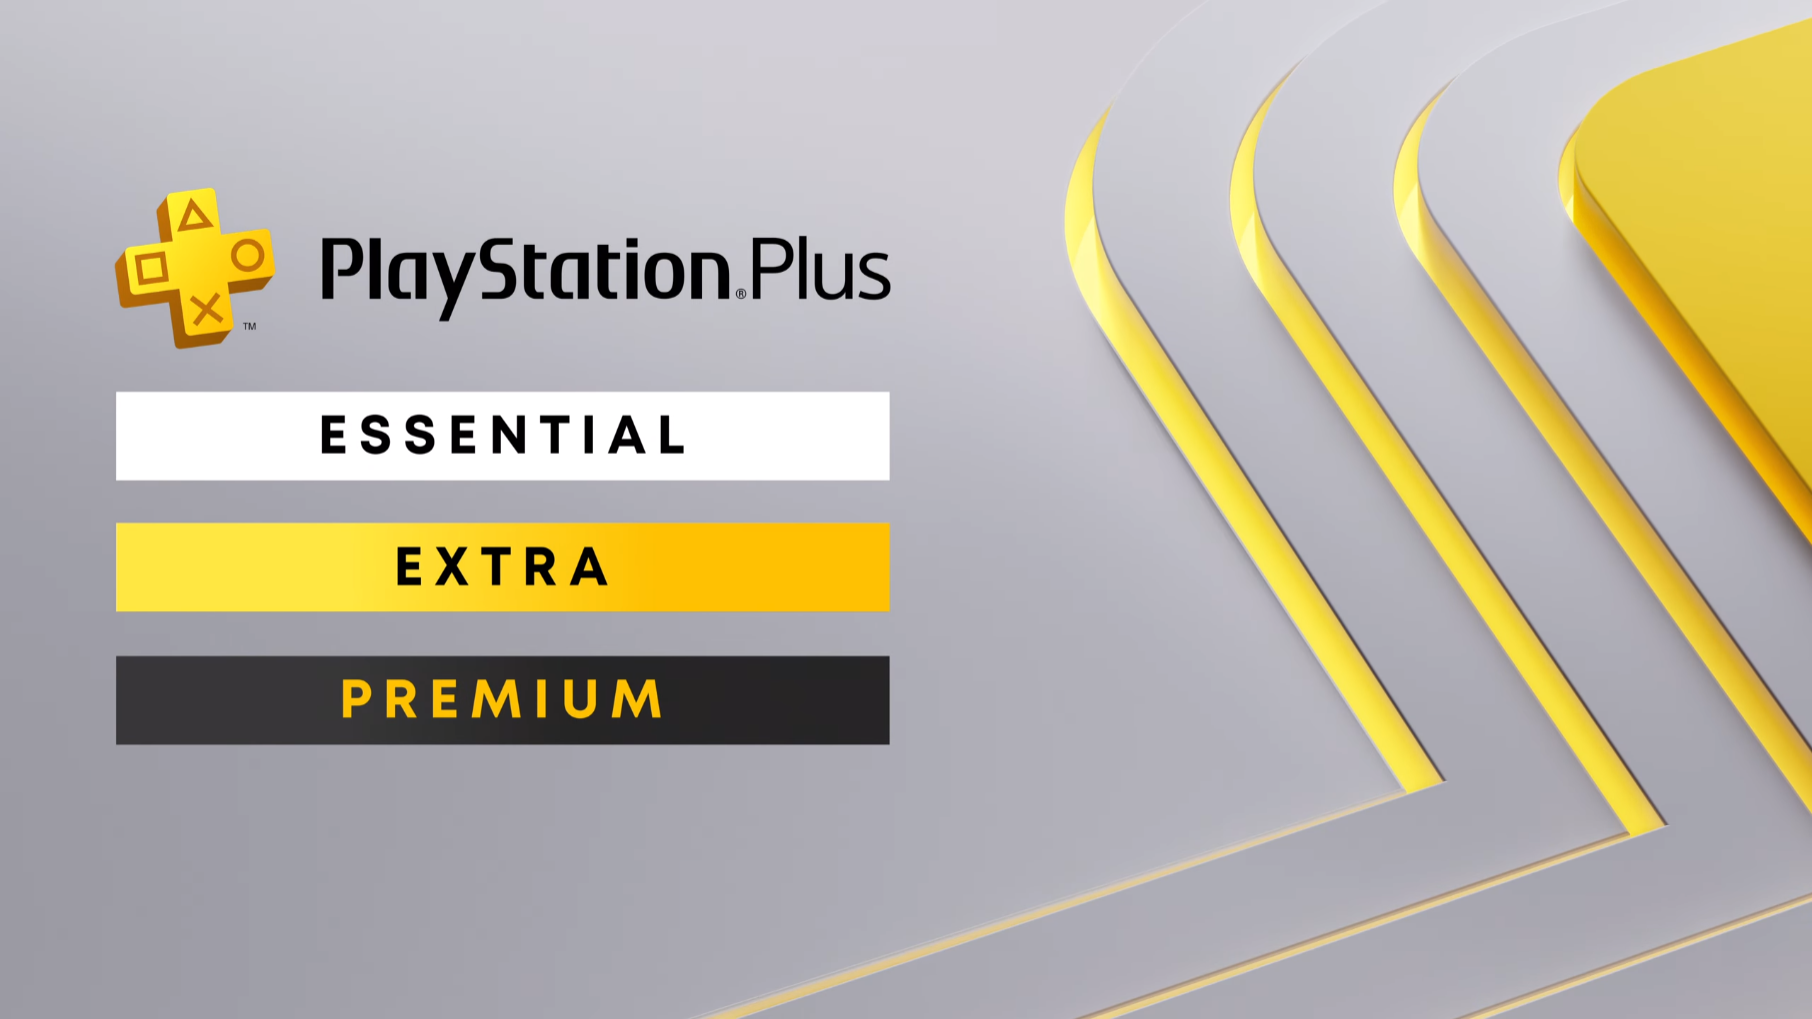 A PlayStation Plus logo with text boxes for the three different subscription plans — Essential, Extra, and Premium — listed just below.